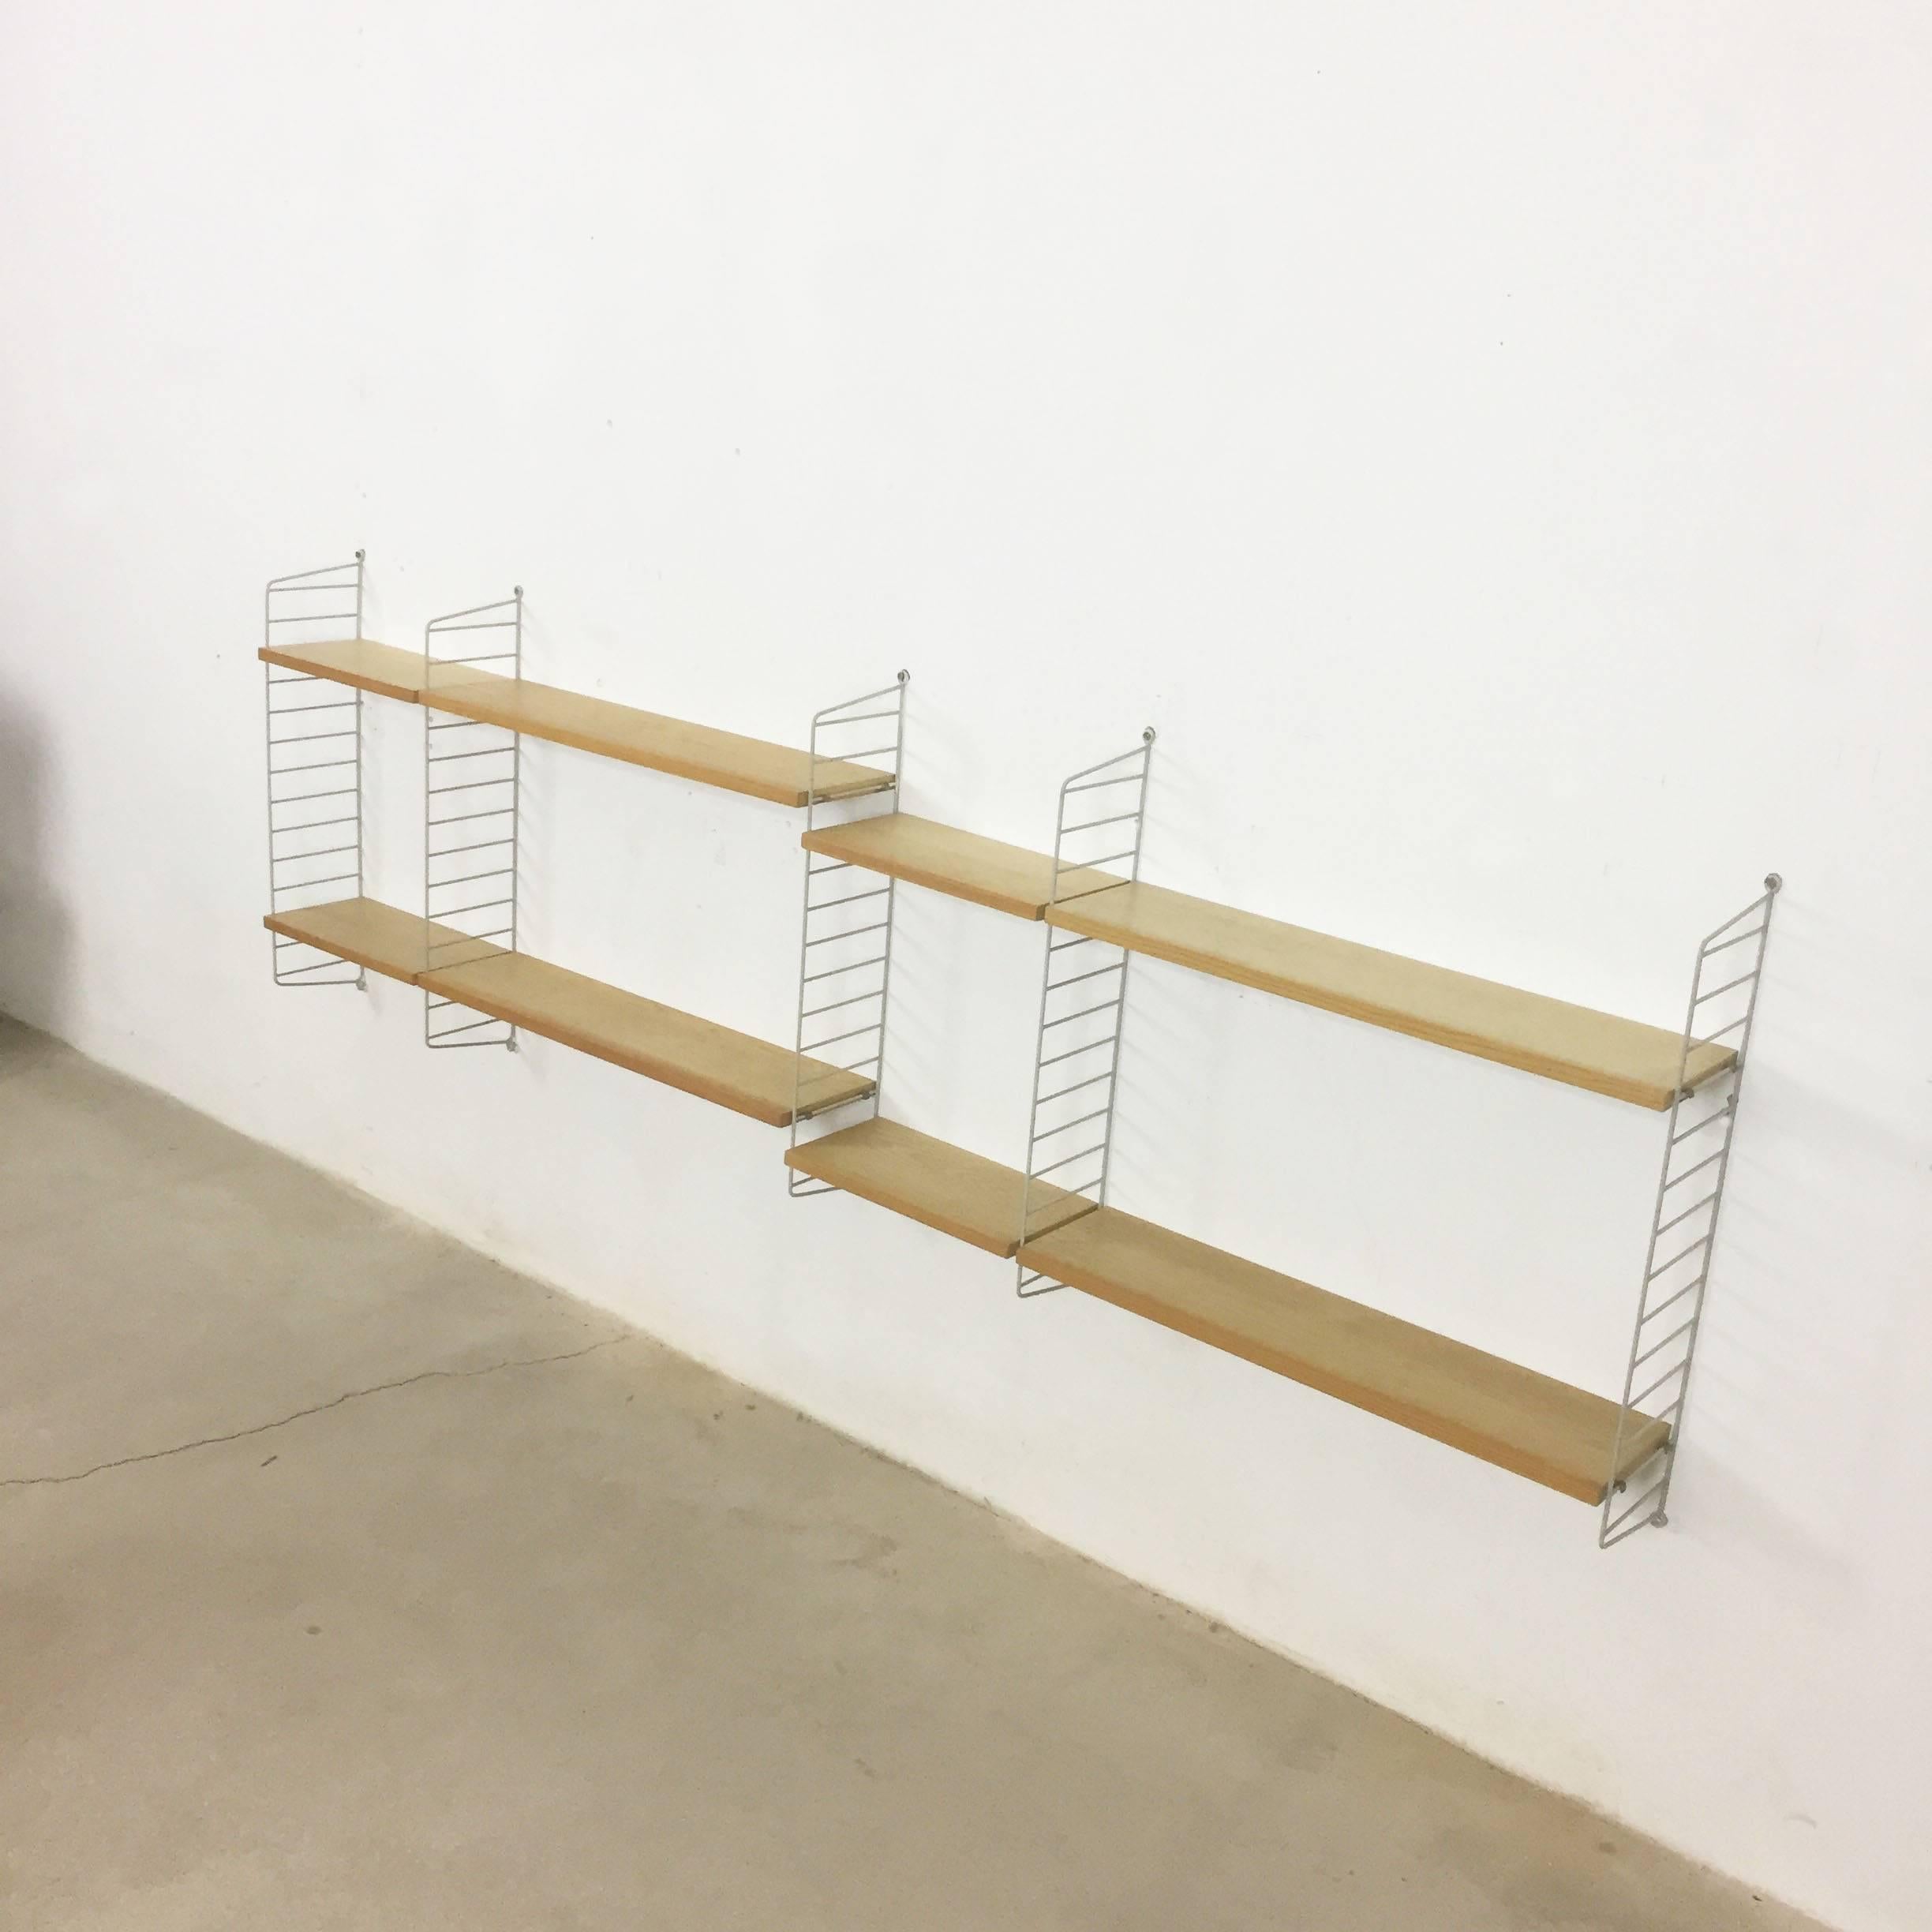 String regal wall unit

Made in Sweden

Bokhyllan 'The Ladder Shelf’

Design: Nils und Kajsa Strinning, 1949

The architect Nisse Strinning was born in 1917. From 1940-1947 he studied architecture in Stockholm, before he designed the